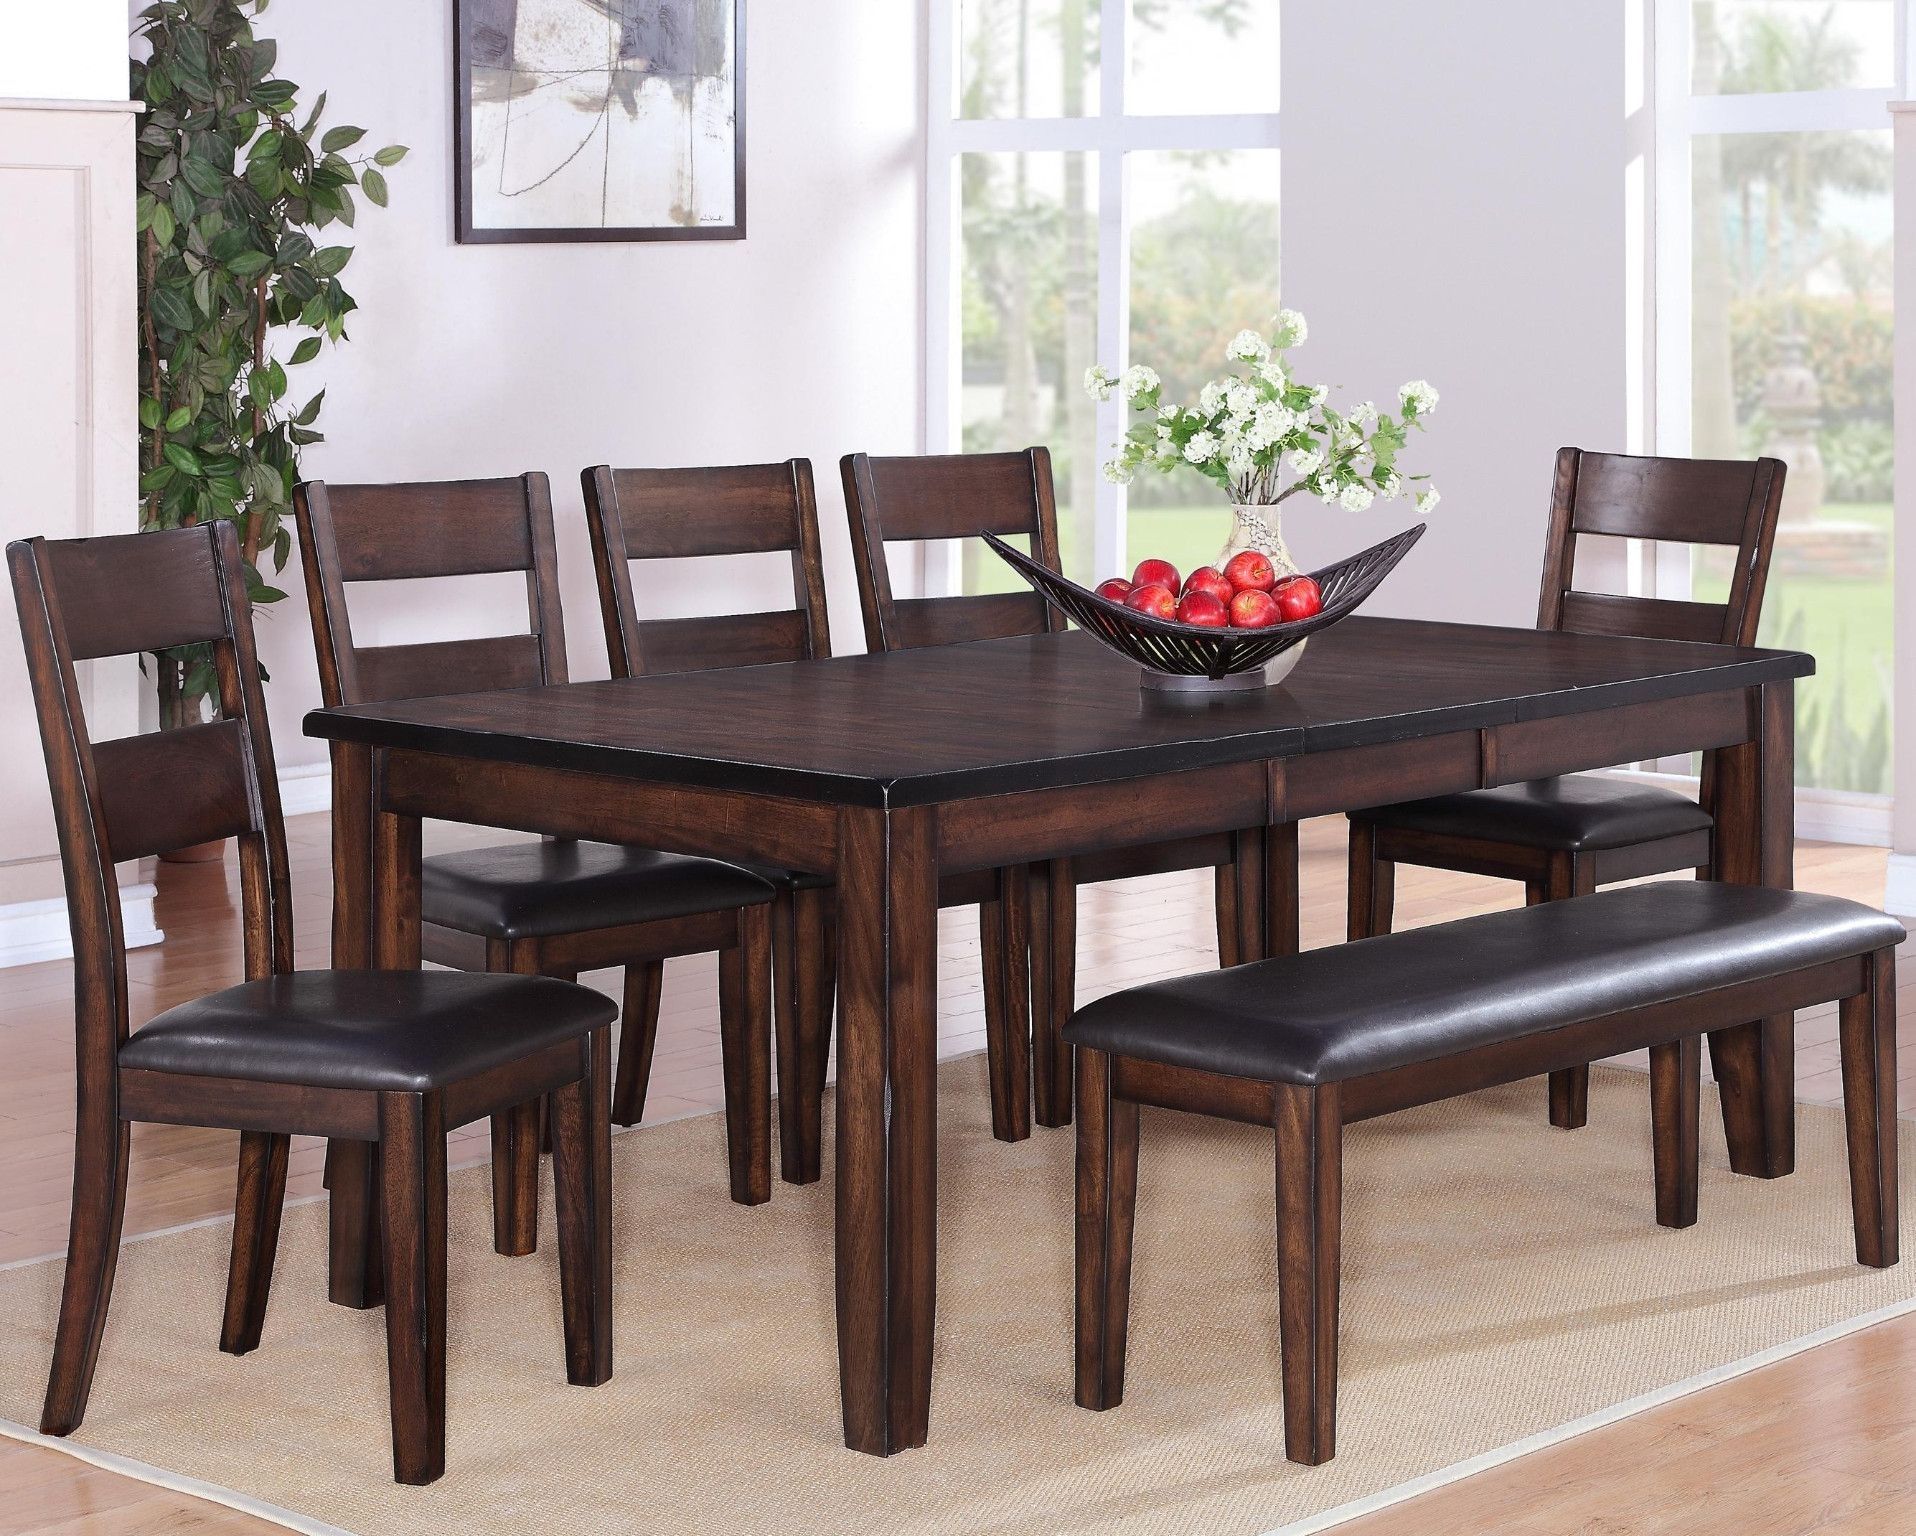 Maldives 5 Piece Dinette Table And 4 Chairs $699.00 Table $ (View 4 of 20)